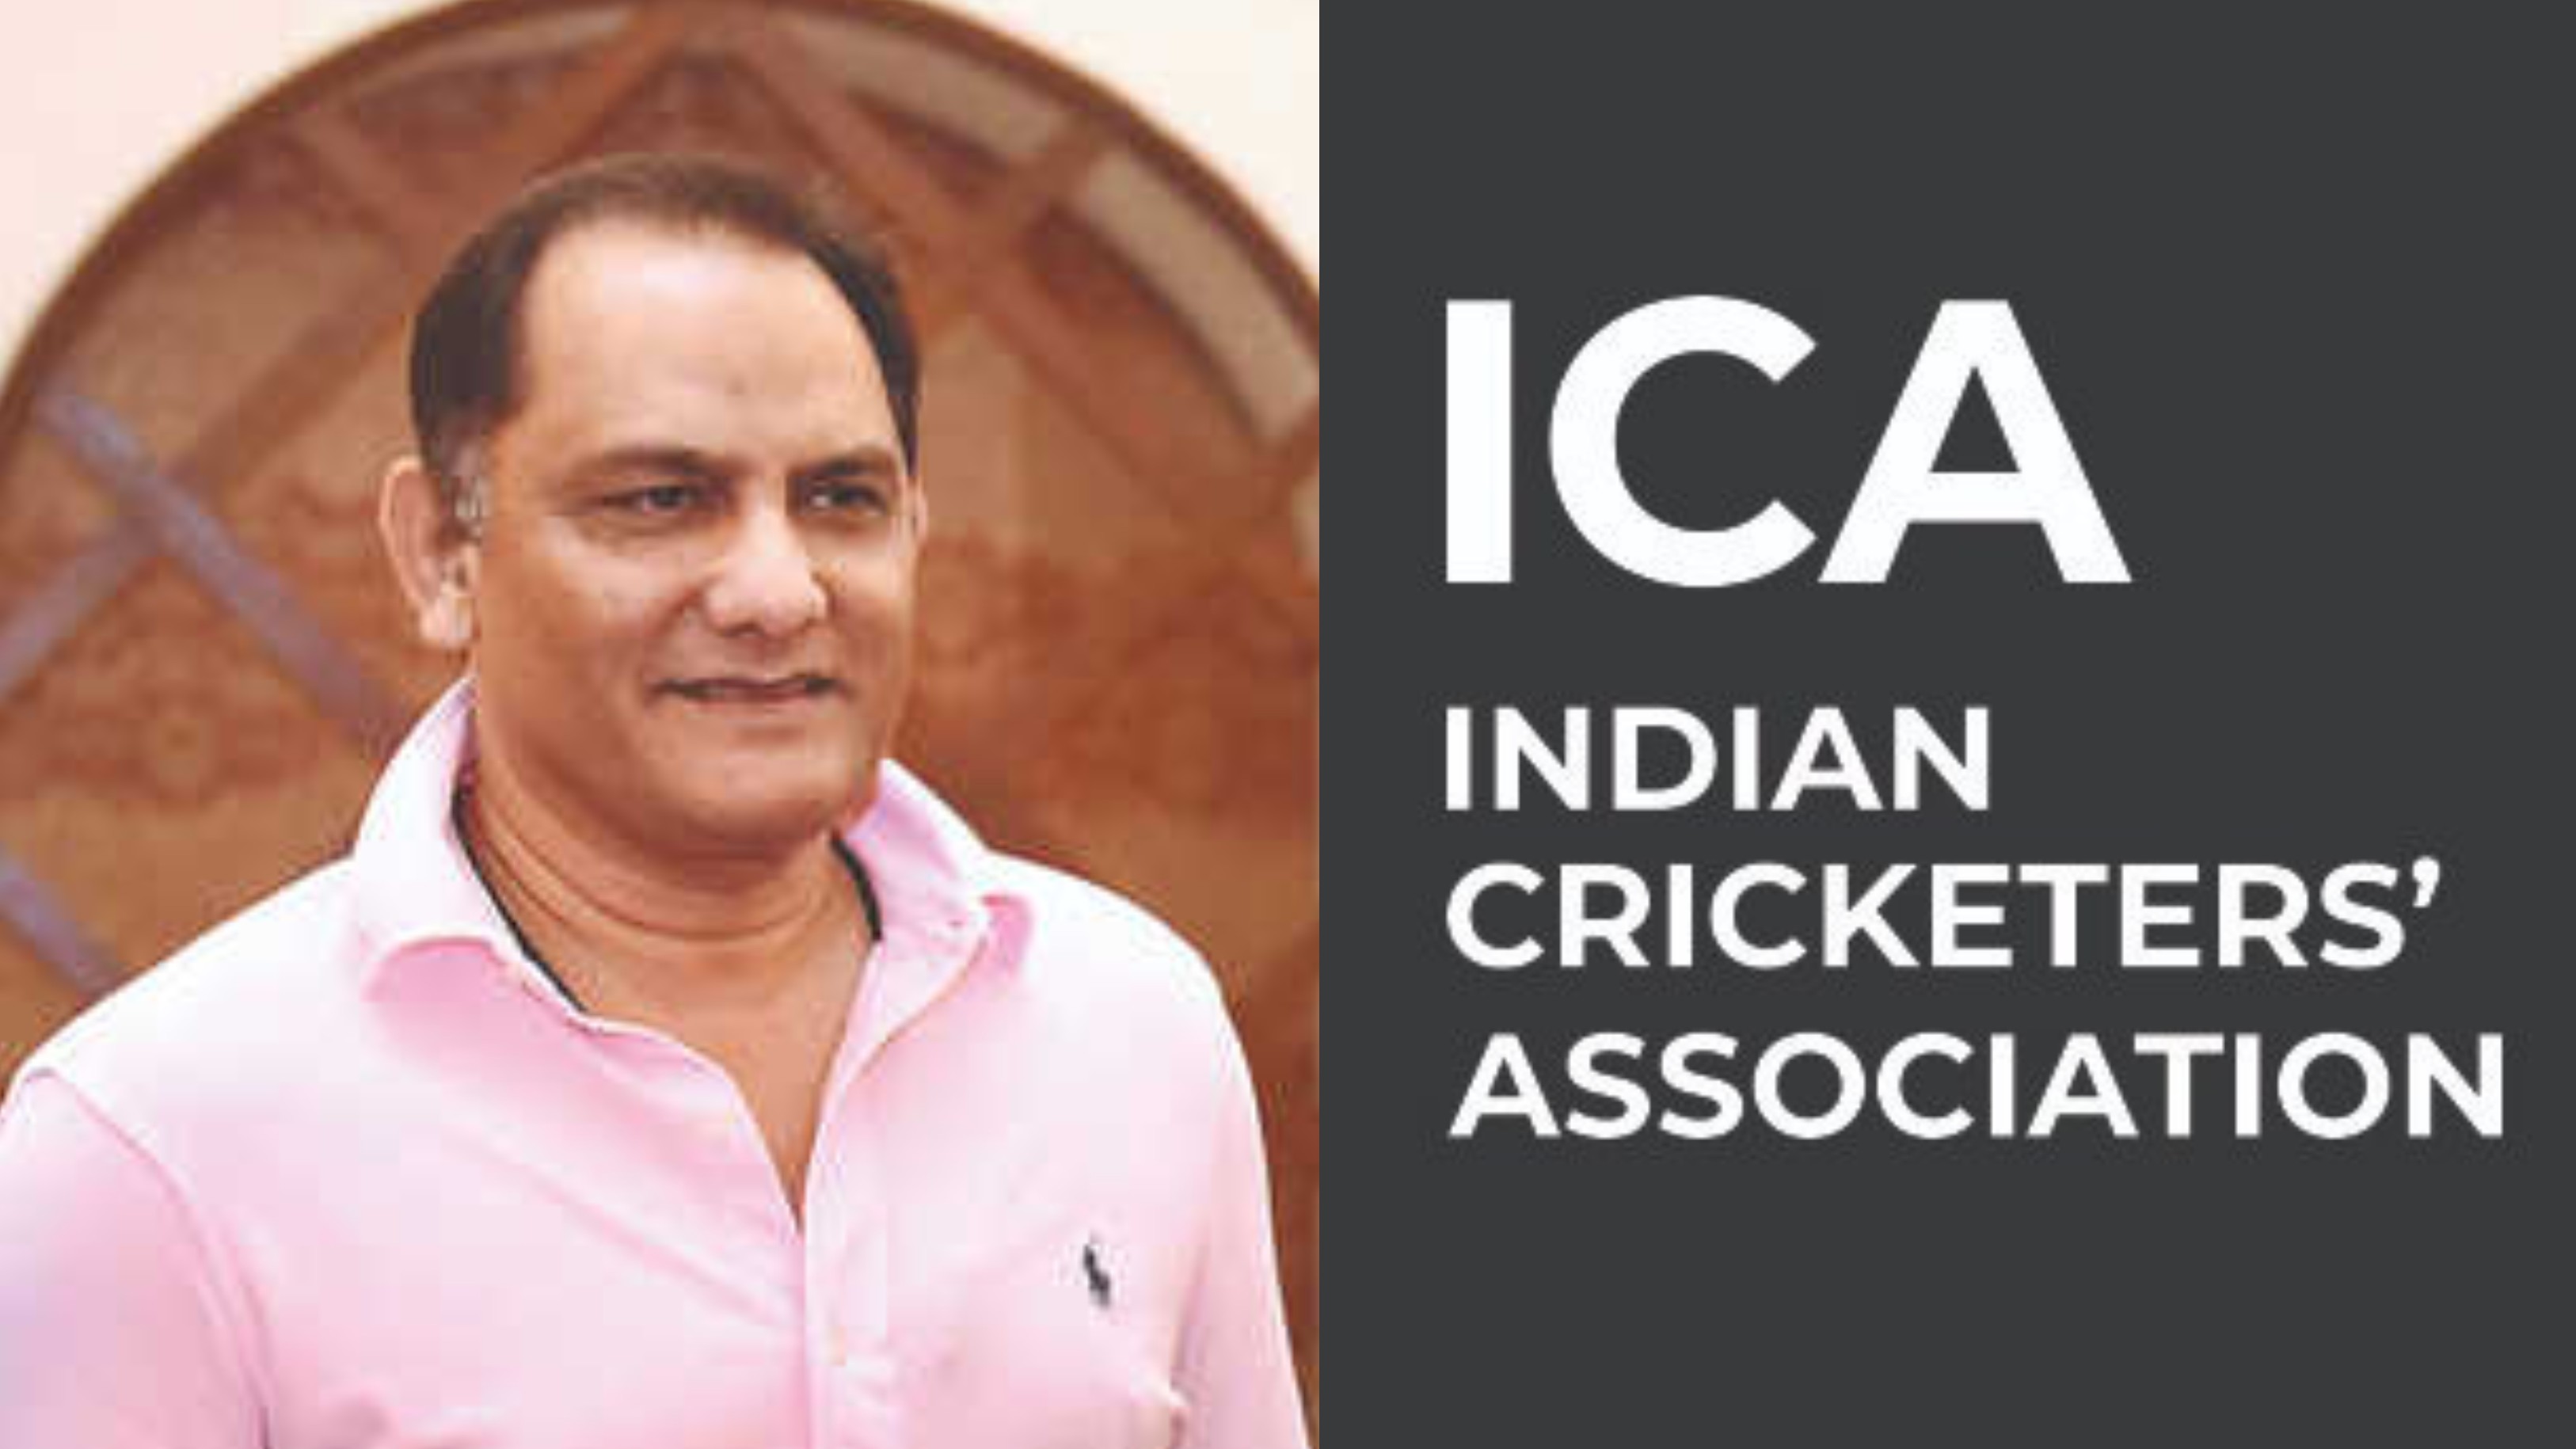 Azharuddin pledges support as ICA raises Rs 24 Lakhs to help needy cricketers in time of crisis